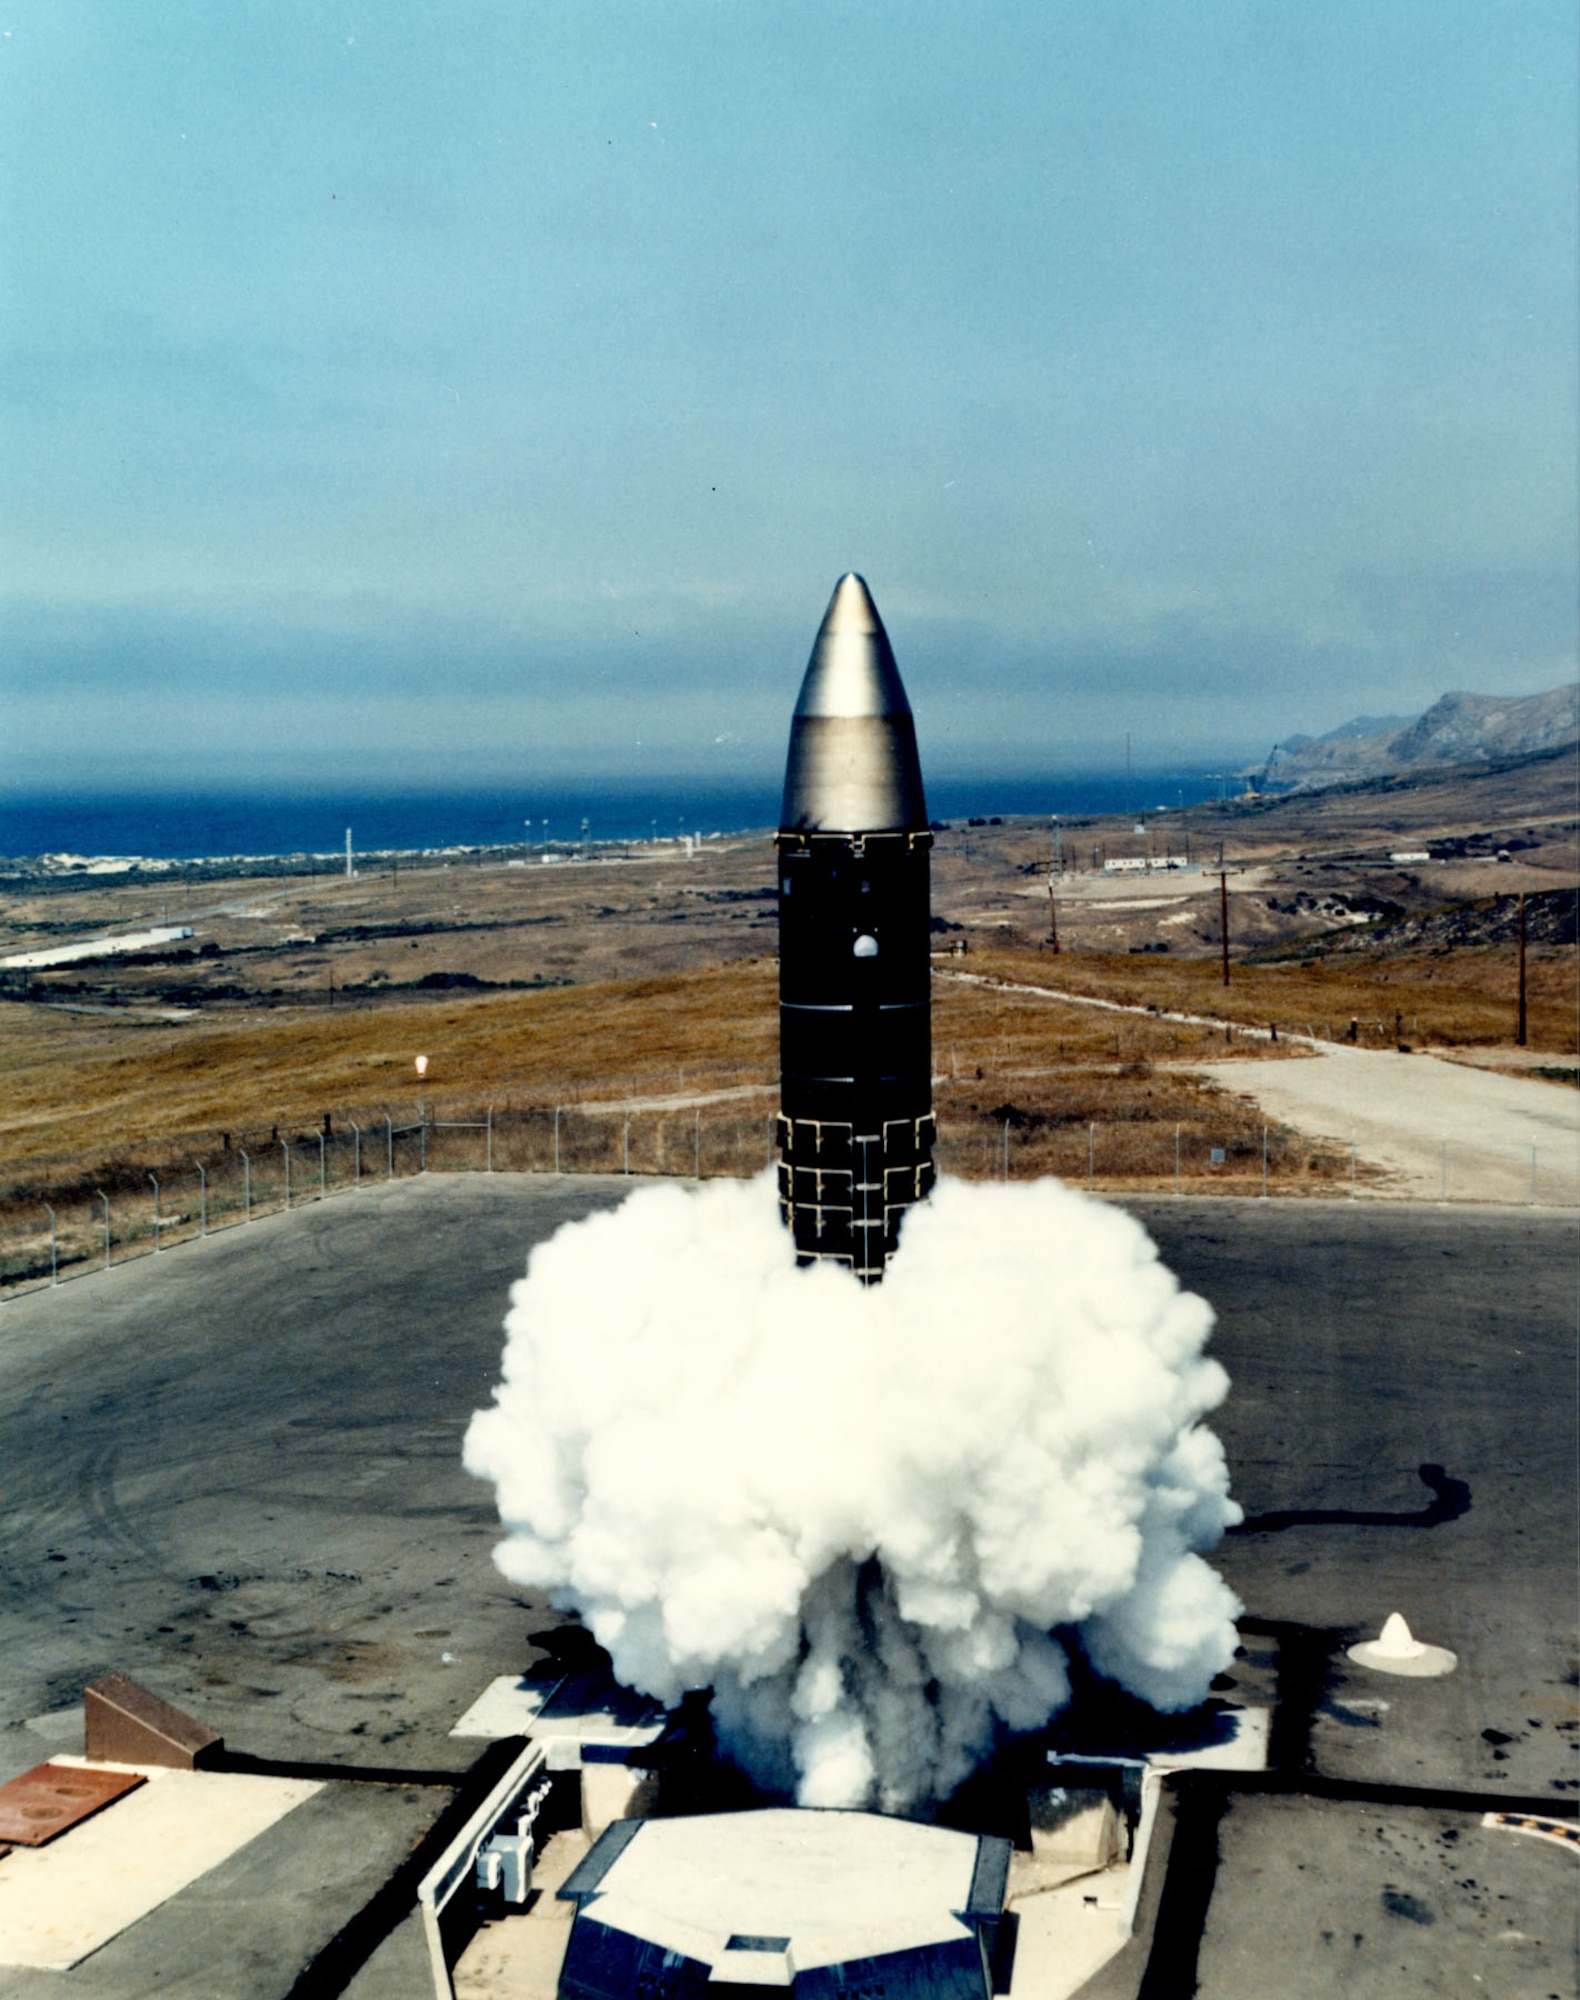 The cold launch system ejects Peacekeeper from its canister with high-pressure steam. (U.S. Air Force photo)